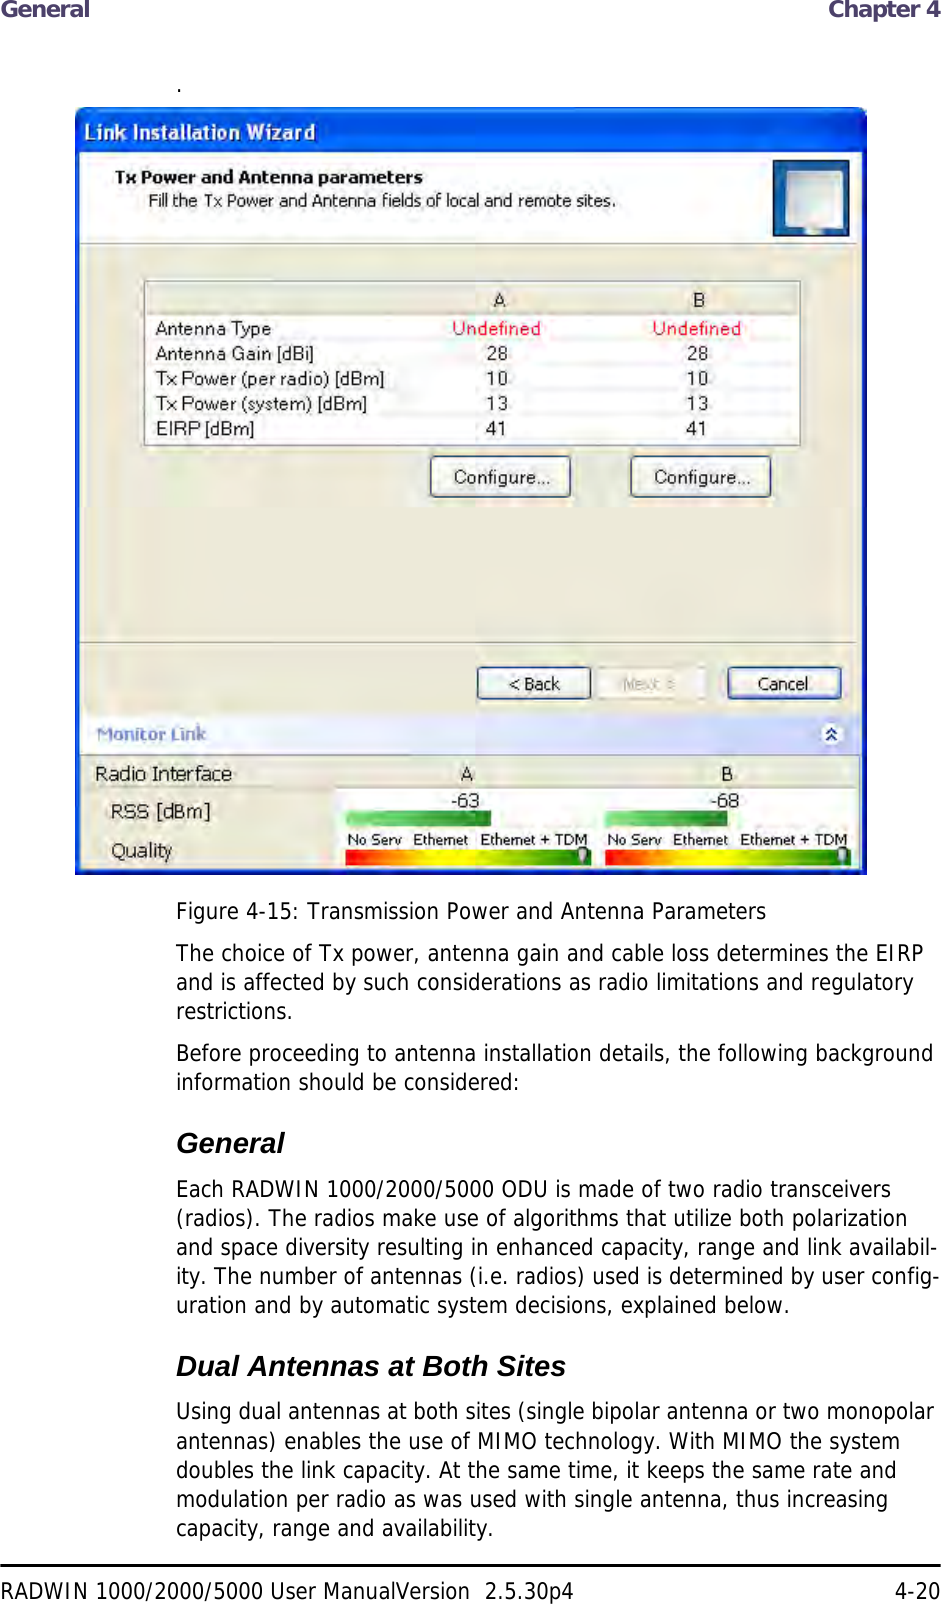 General  Chapter 4RADWIN 1000/2000/5000 User ManualVersion  2.5.30p4 4-20.Figure 4-15: Transmission Power and Antenna ParametersThe choice of Tx power, antenna gain and cable loss determines the EIRP and is affected by such considerations as radio limitations and regulatory restrictions.Before proceeding to antenna installation details, the following background information should be considered:GeneralEach RADWIN 1000/2000/5000 ODU is made of two radio transceivers (radios). The radios make use of algorithms that utilize both polarization and space diversity resulting in enhanced capacity, range and link availabil-ity. The number of antennas (i.e. radios) used is determined by user config-uration and by automatic system decisions, explained below. Dual Antennas at Both SitesUsing dual antennas at both sites (single bipolar antenna or two monopolar antennas) enables the use of MIMO technology. With MIMO the system doubles the link capacity. At the same time, it keeps the same rate and modulation per radio as was used with single antenna, thus increasing capacity, range and availability.